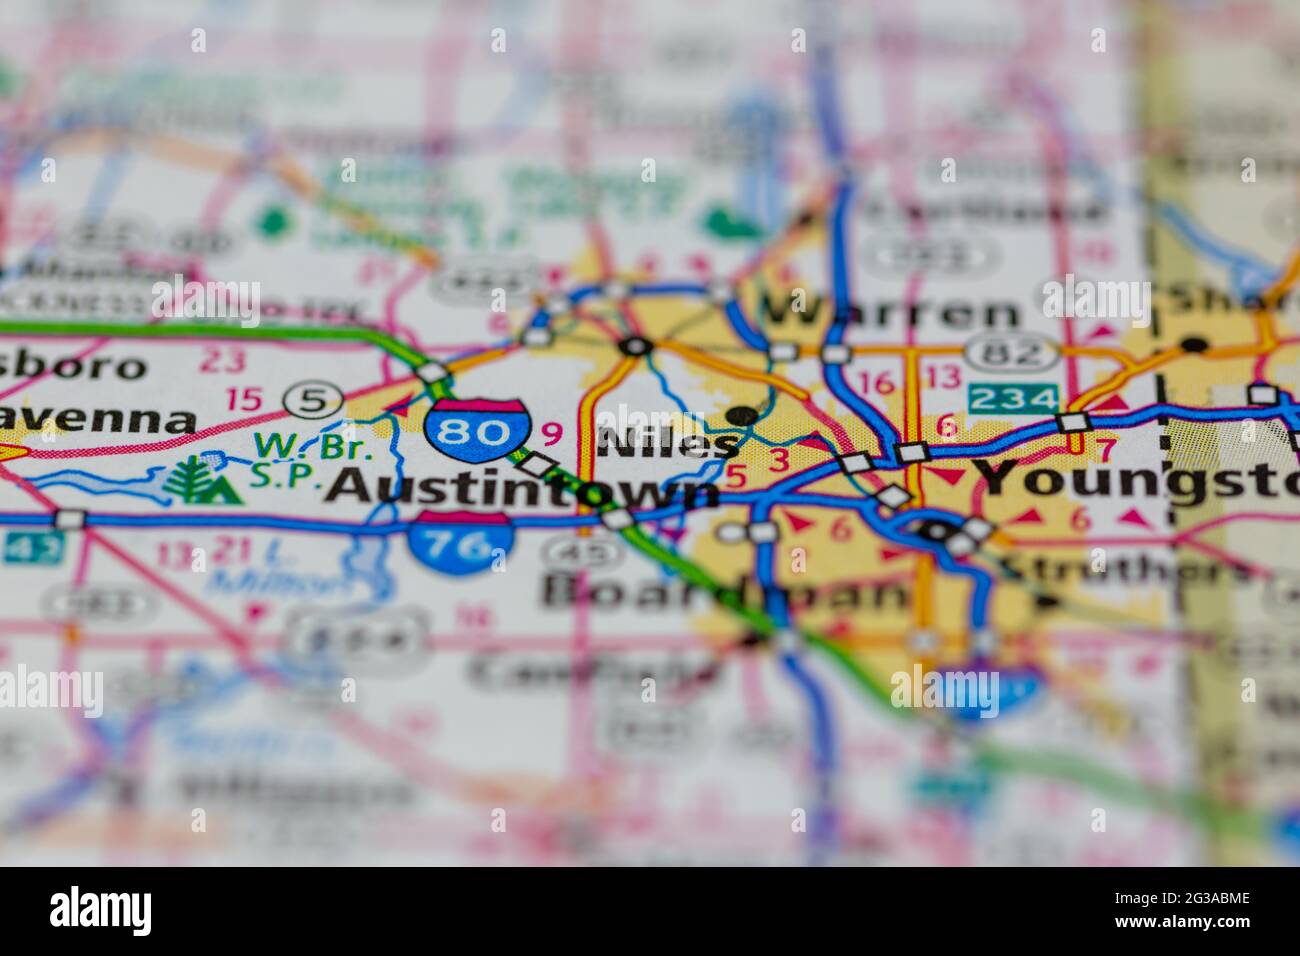 Niles Ohio USA shown on a Geography map or Road map Stock Photo